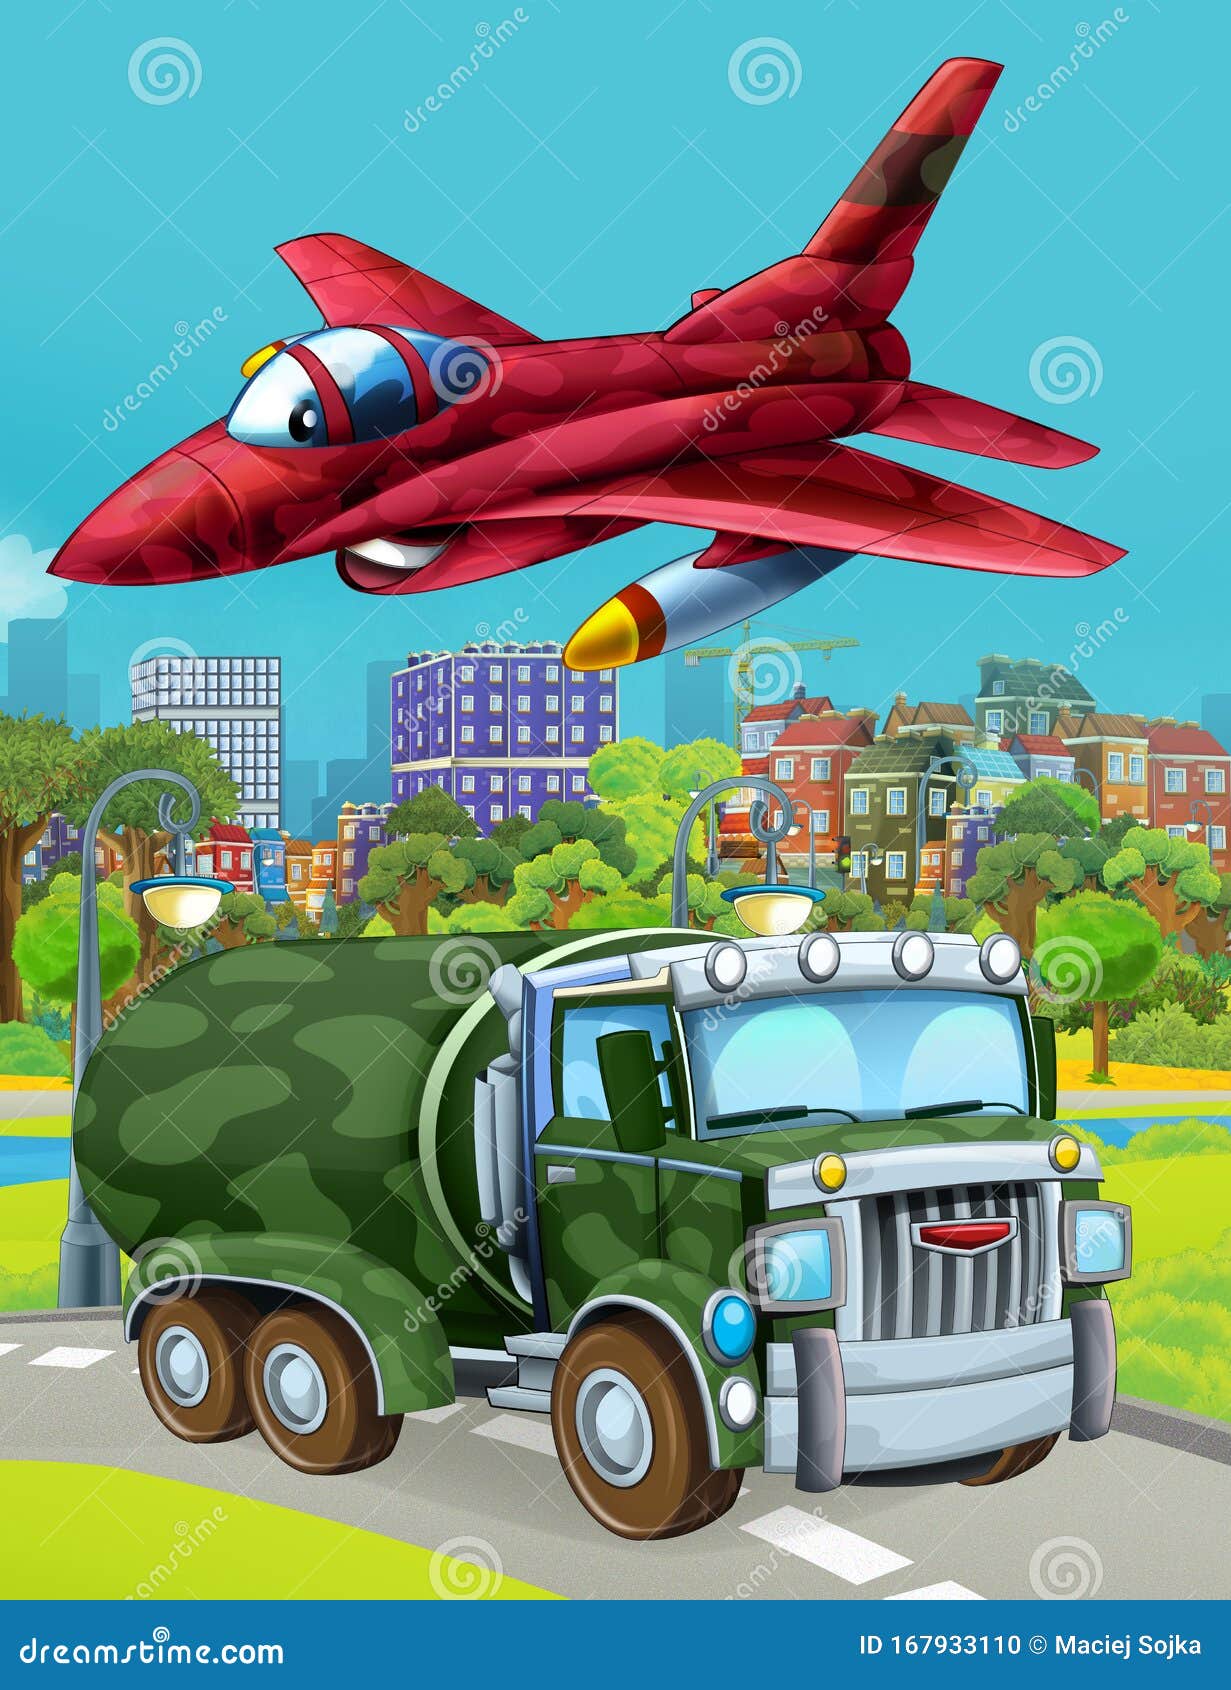 Cartoon Scene with Military Army Car Vehicle on the Road and Jet Plane  Flying Over Stock Photo - Image of driving, colorful: 167933110